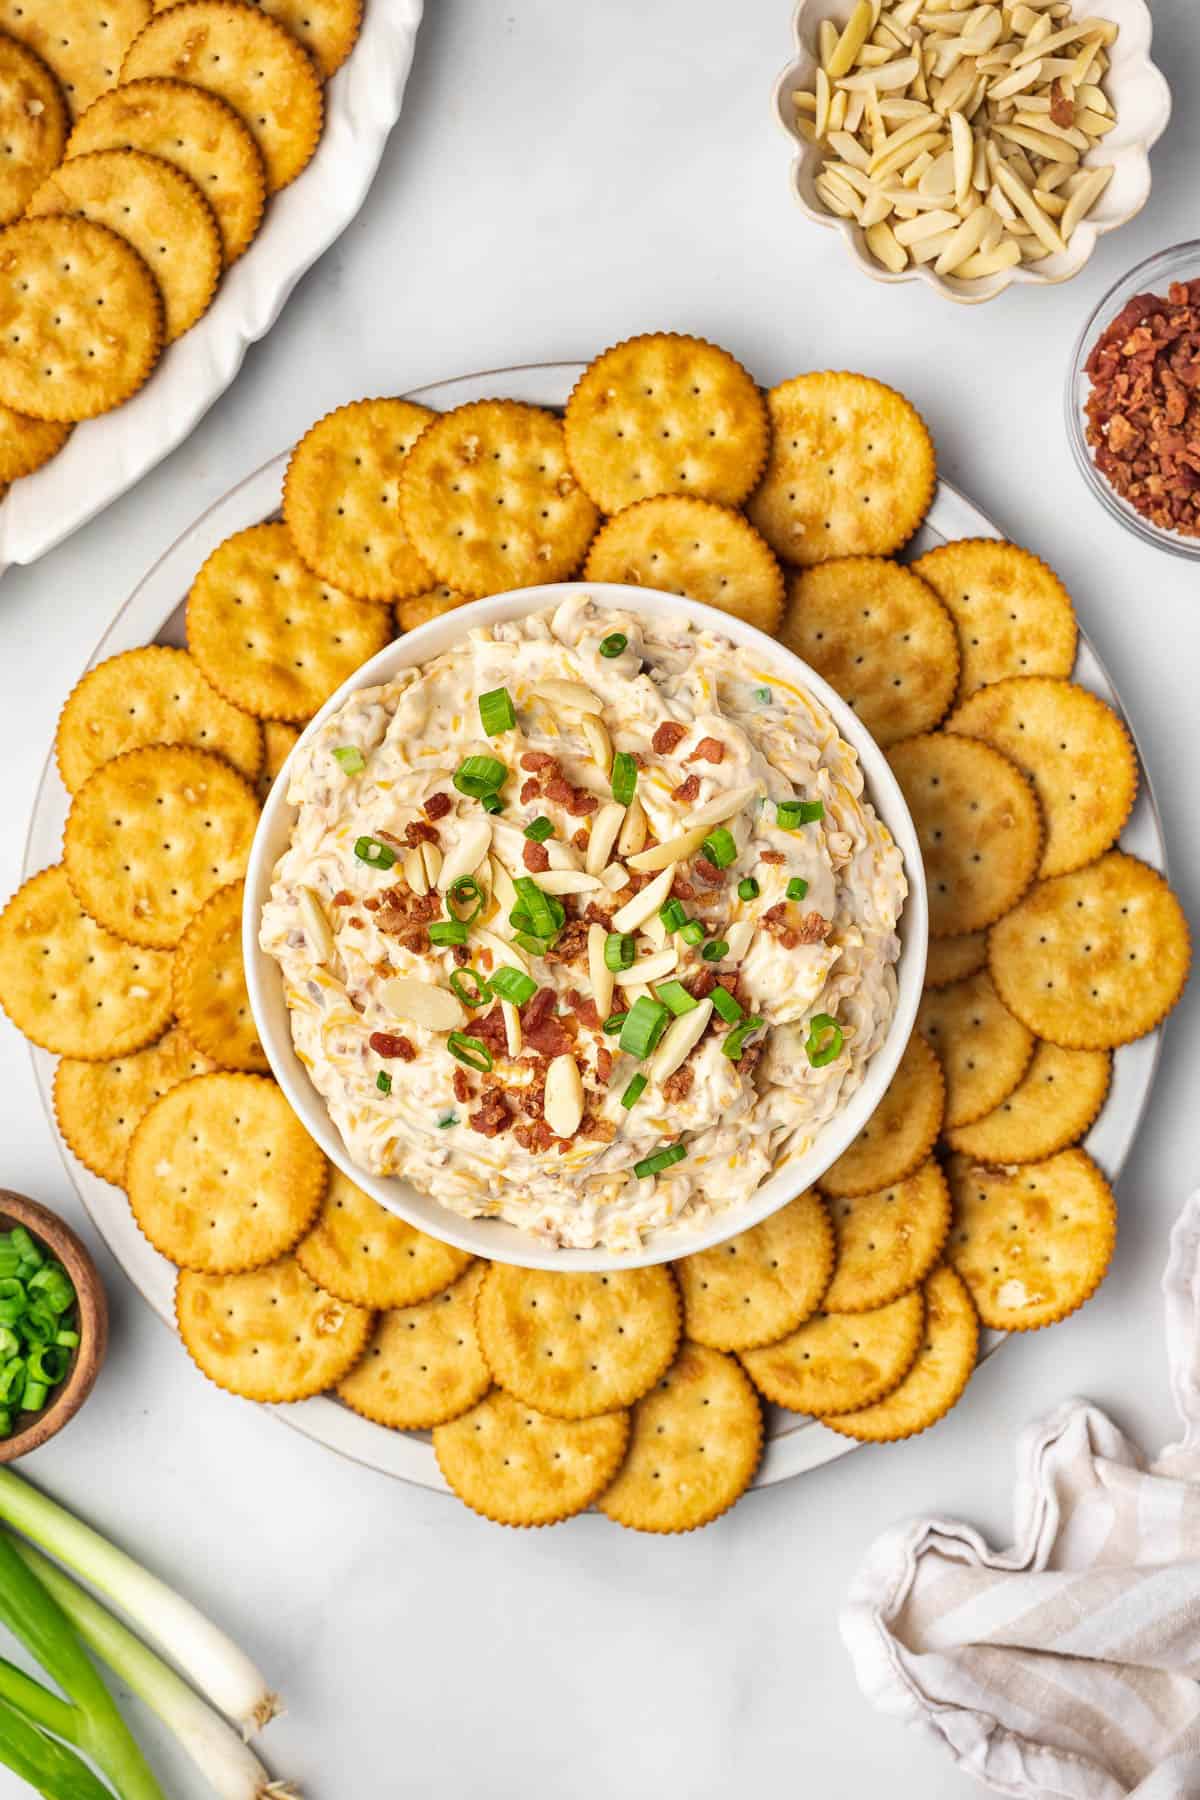 Million dollar dip in a bowl surrounded by Ritz crackers for serving.